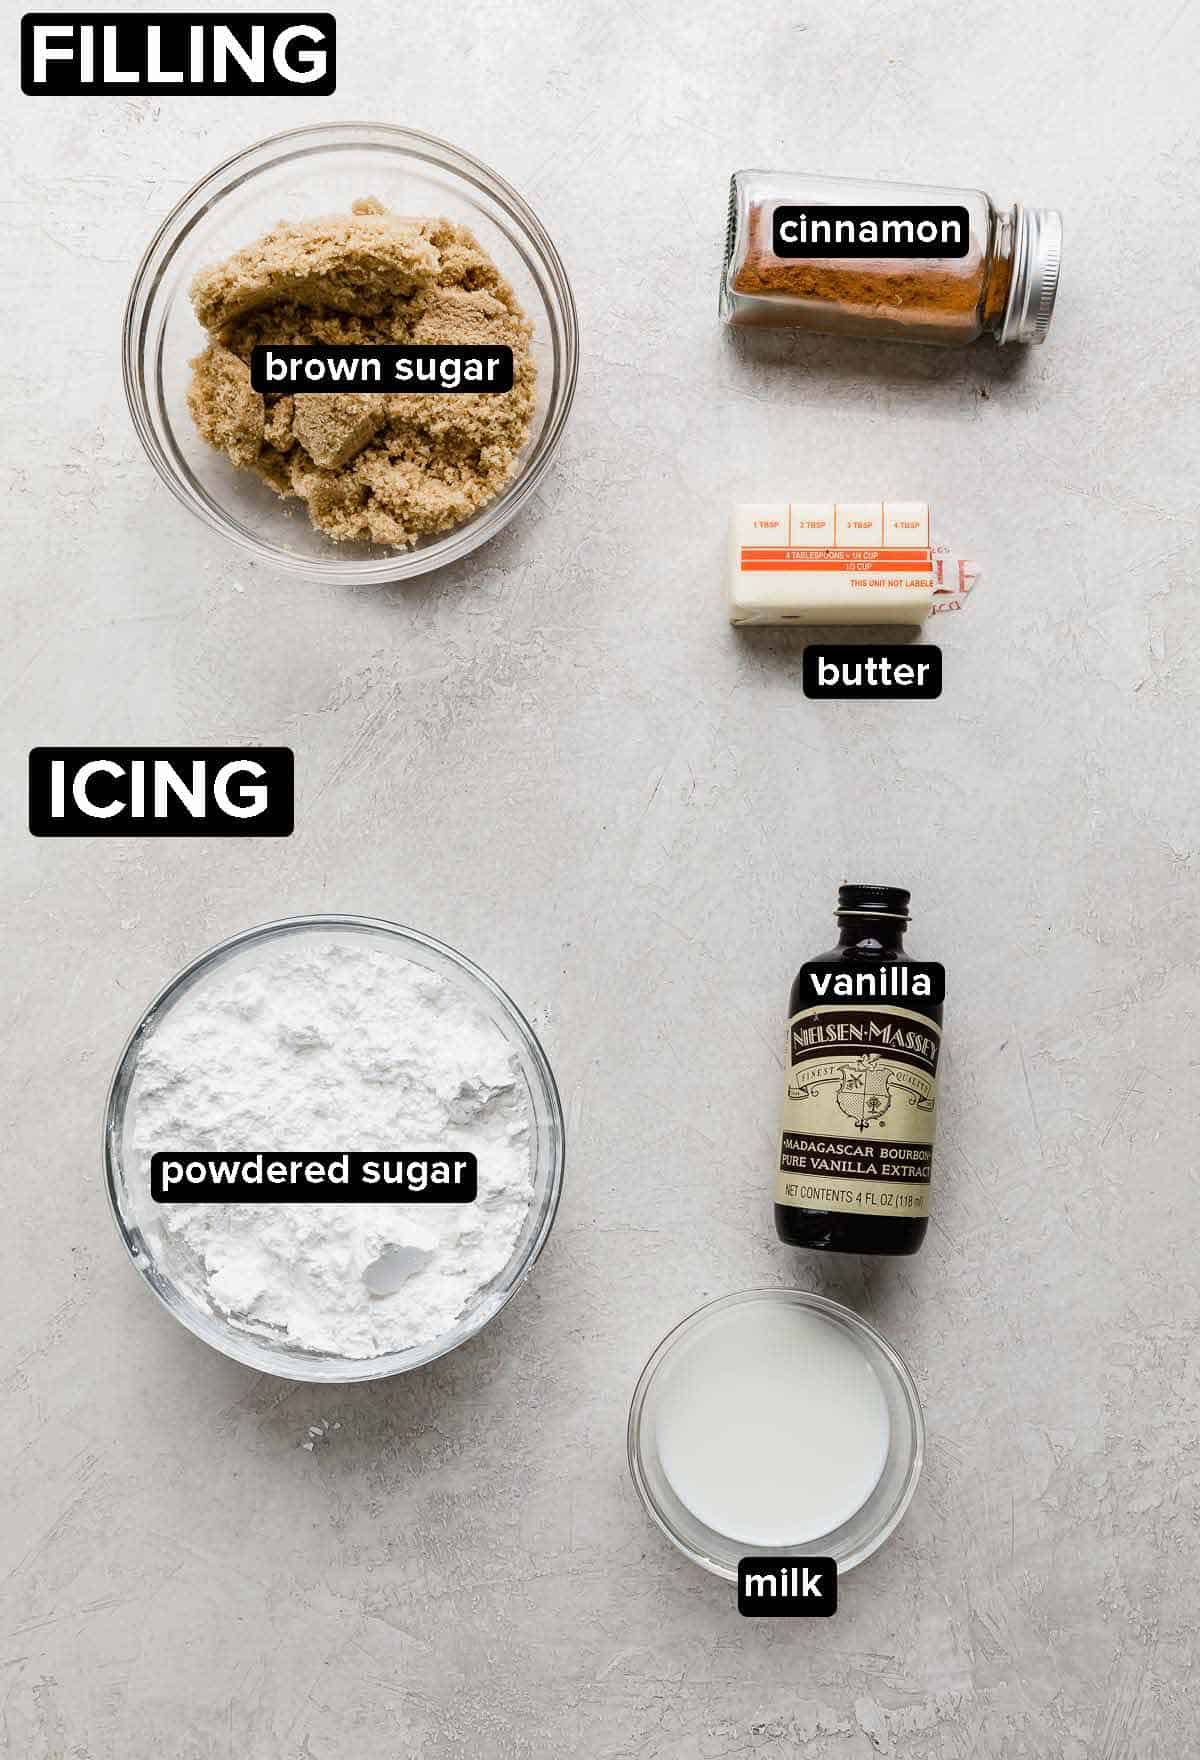 Ingredients used to make Cinnamon Roll Cookies filling and icing on a light gray background.